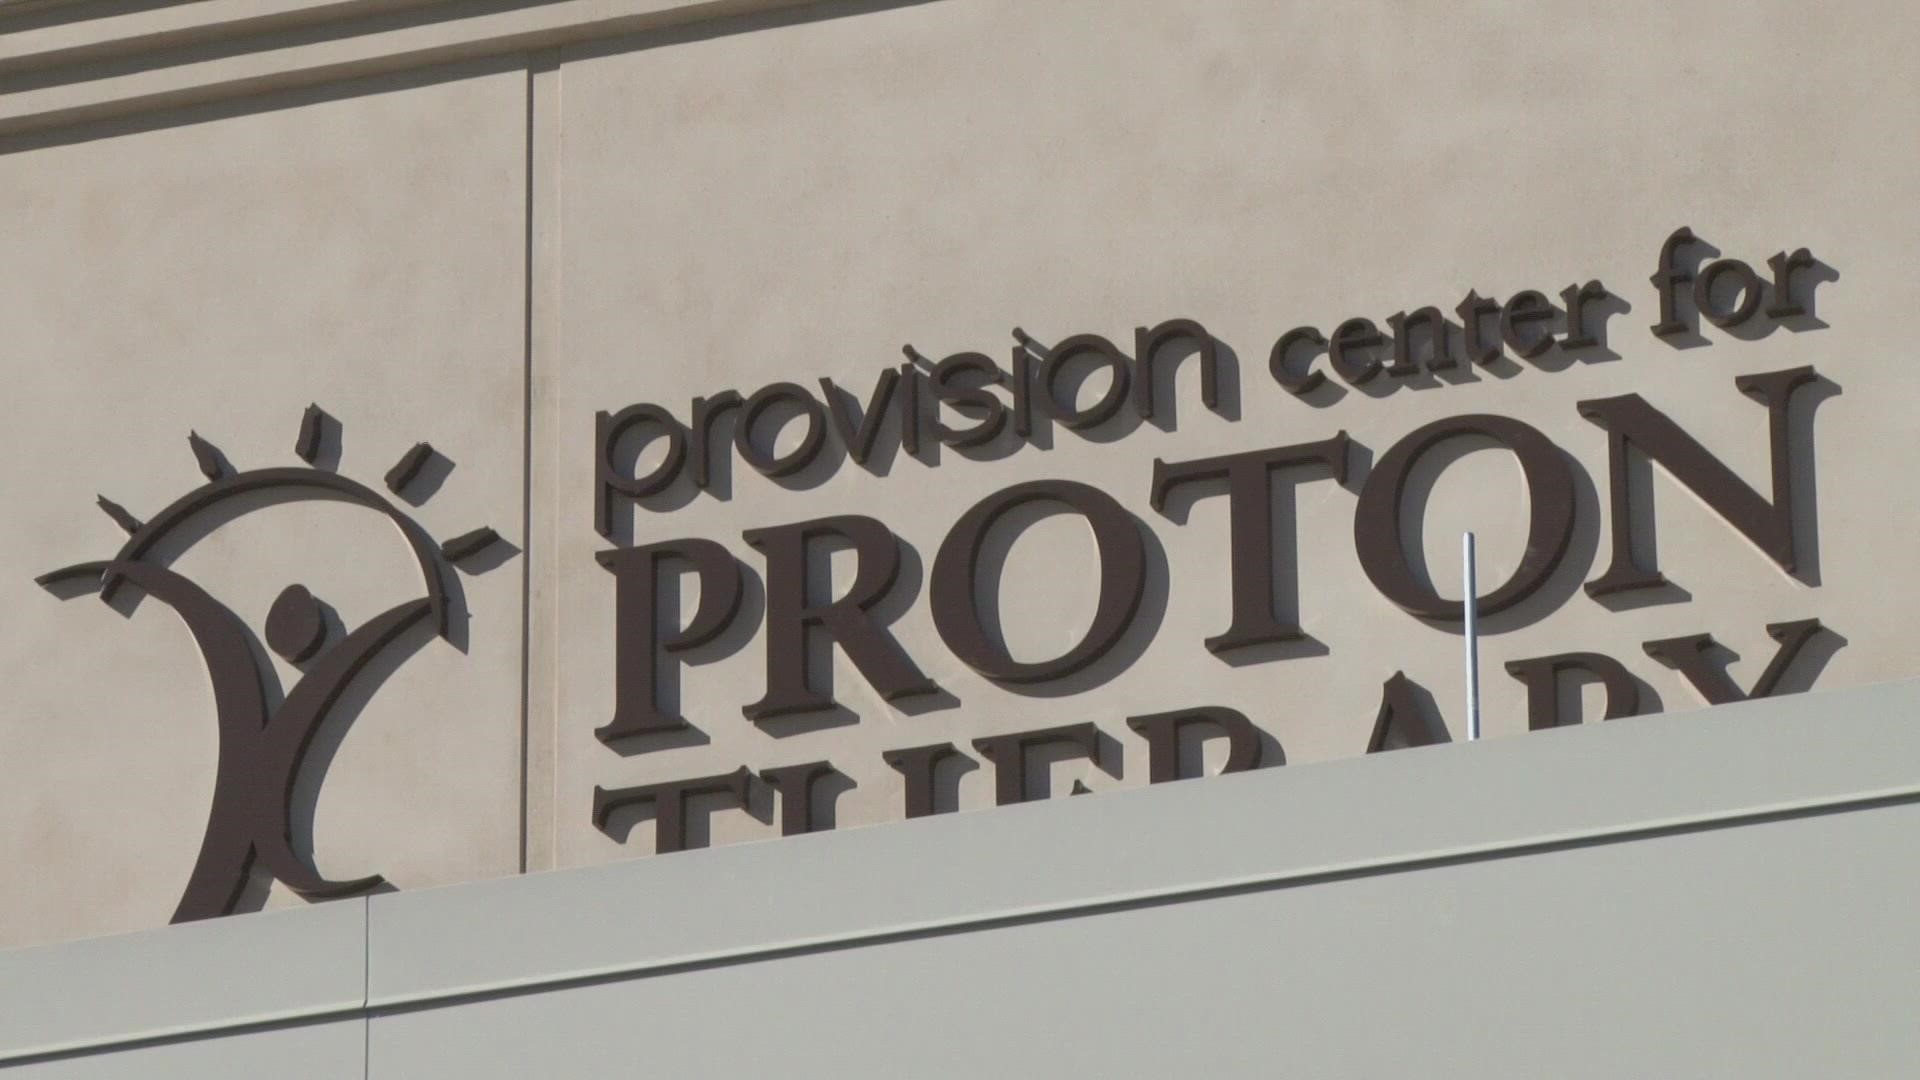 The acquisition was announced Tuesday. Provision CARES Proton Therapy Center's parent had sought bankruptcy protection in 2020.